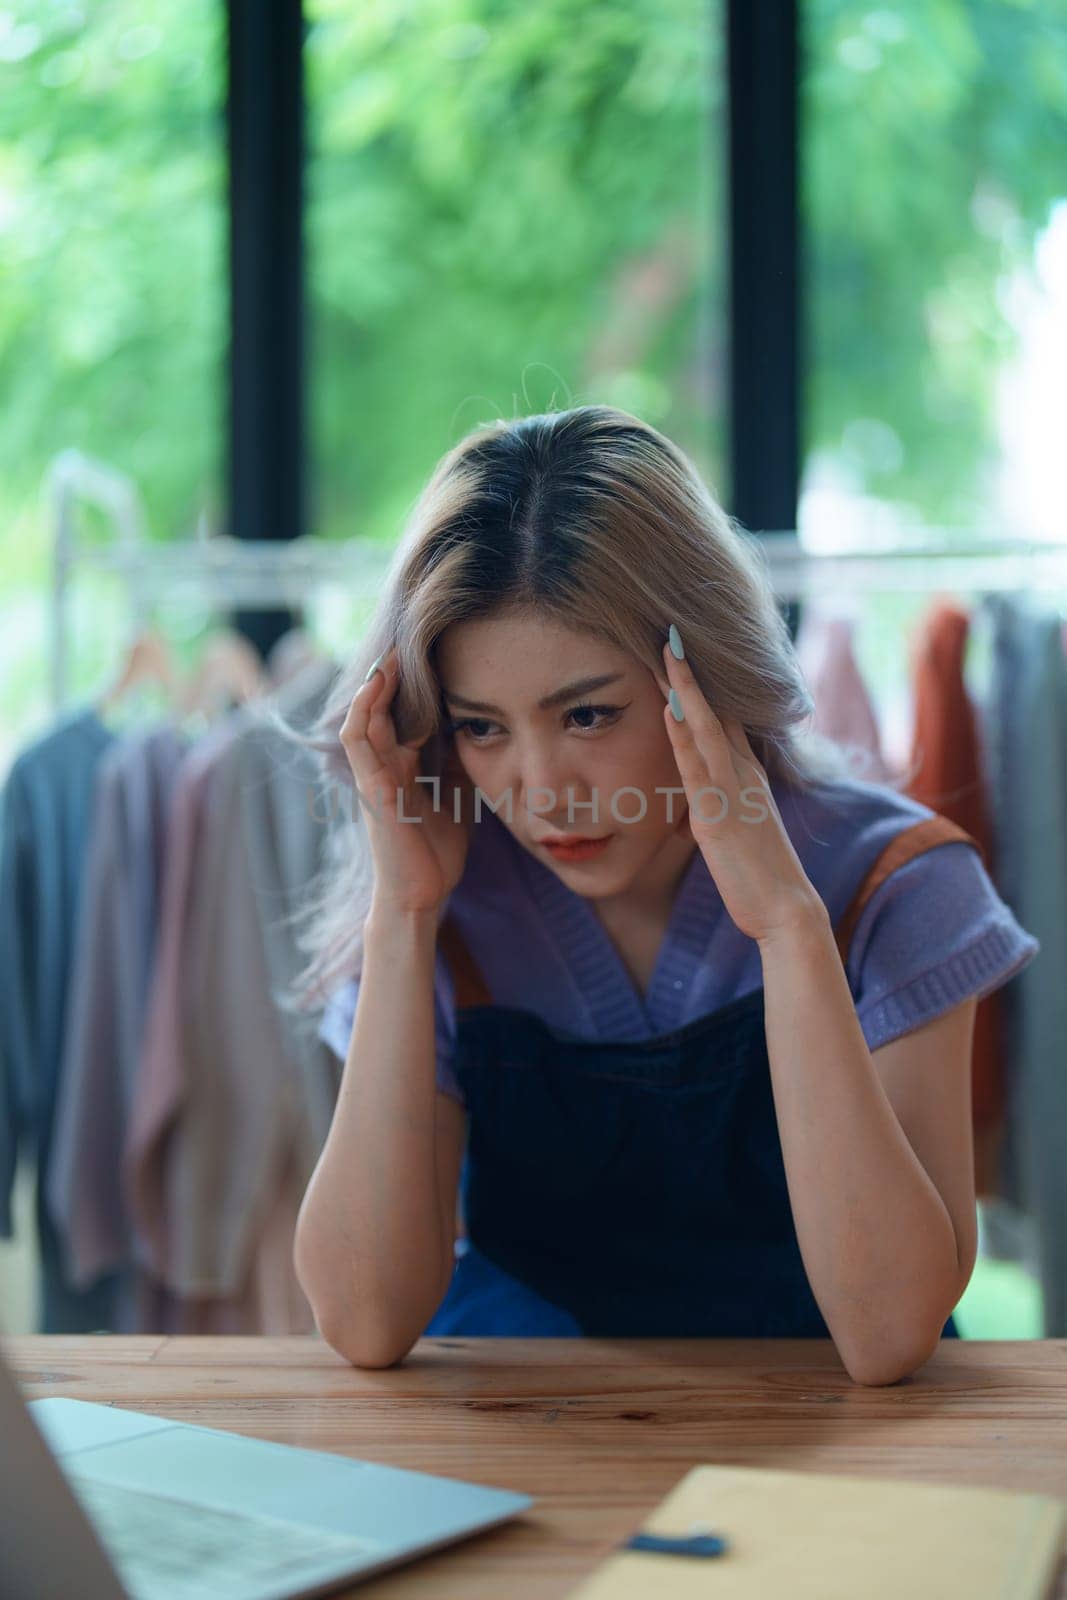 Starting small business entrepreneur of independent Asian woman showing her face worried about the sales of her business not reaching the target set. SME concepts.